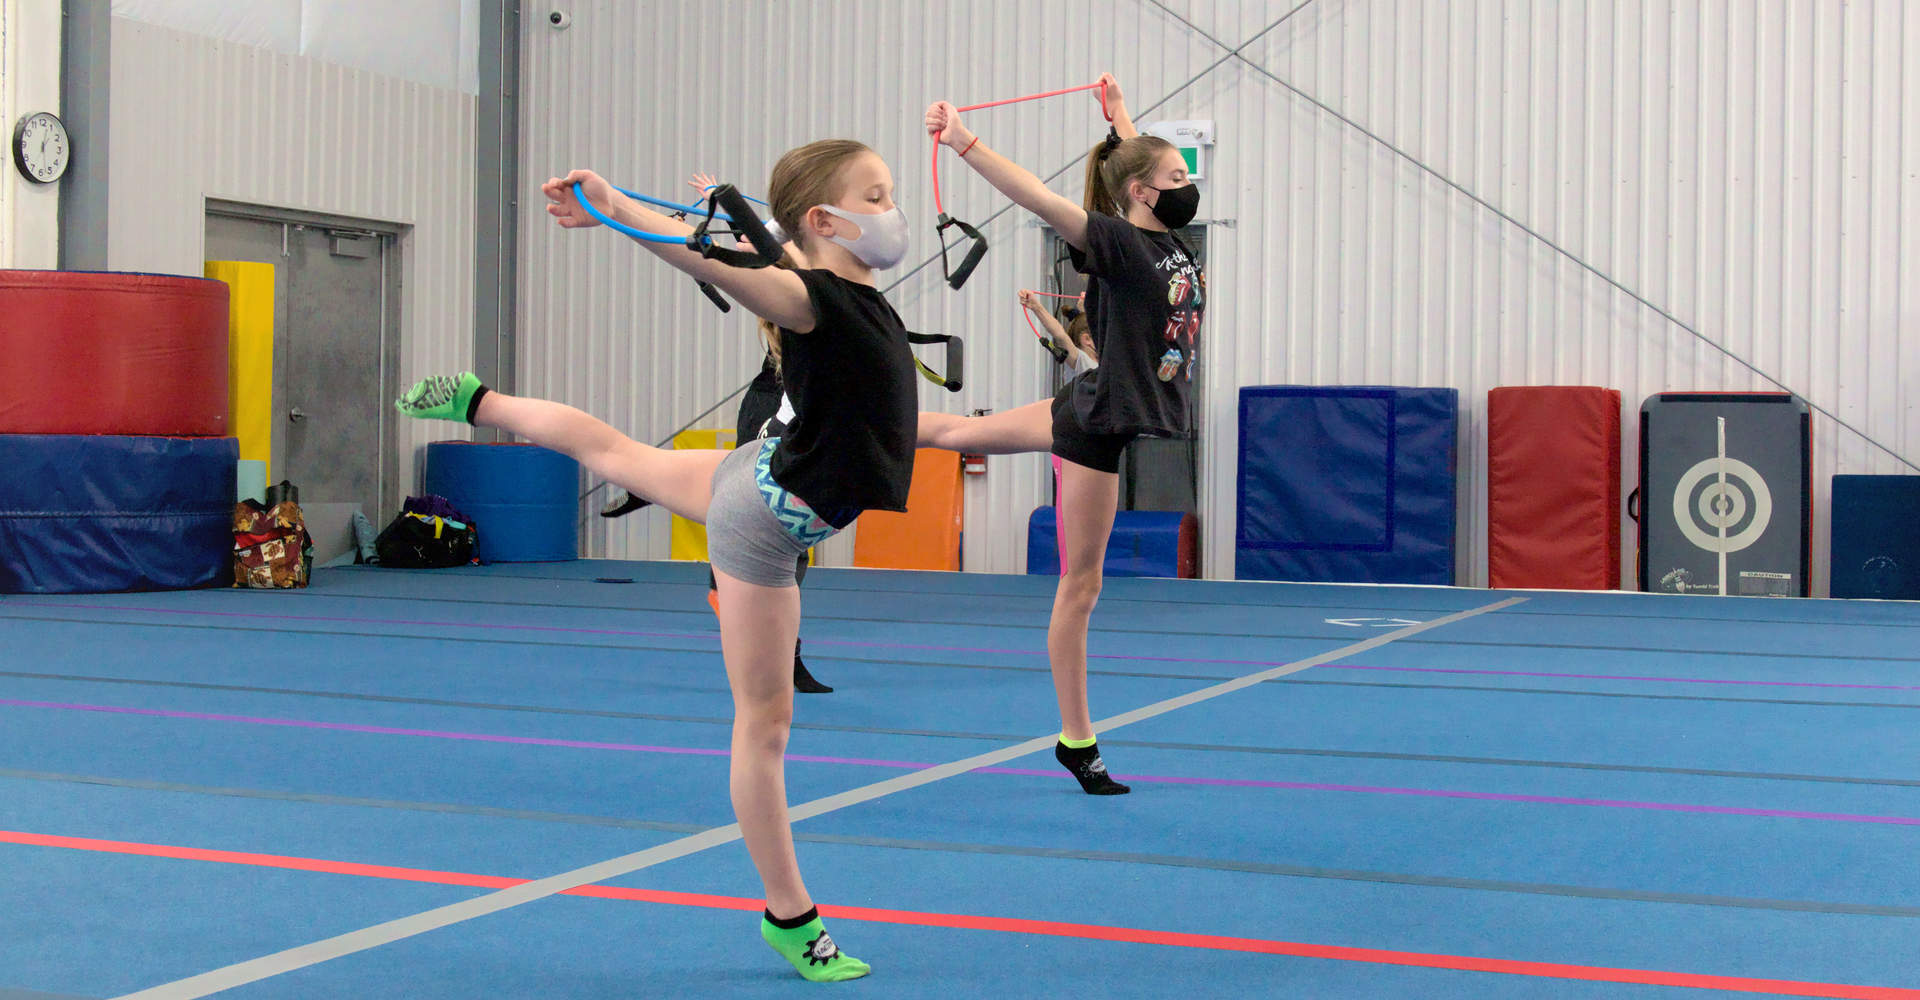 Young gymnasts warming up with back kicks on the spring floor at Gymworld Adventures in Gymnastics in Northwest London - a facility for recreational & competitive gymnastics in north London